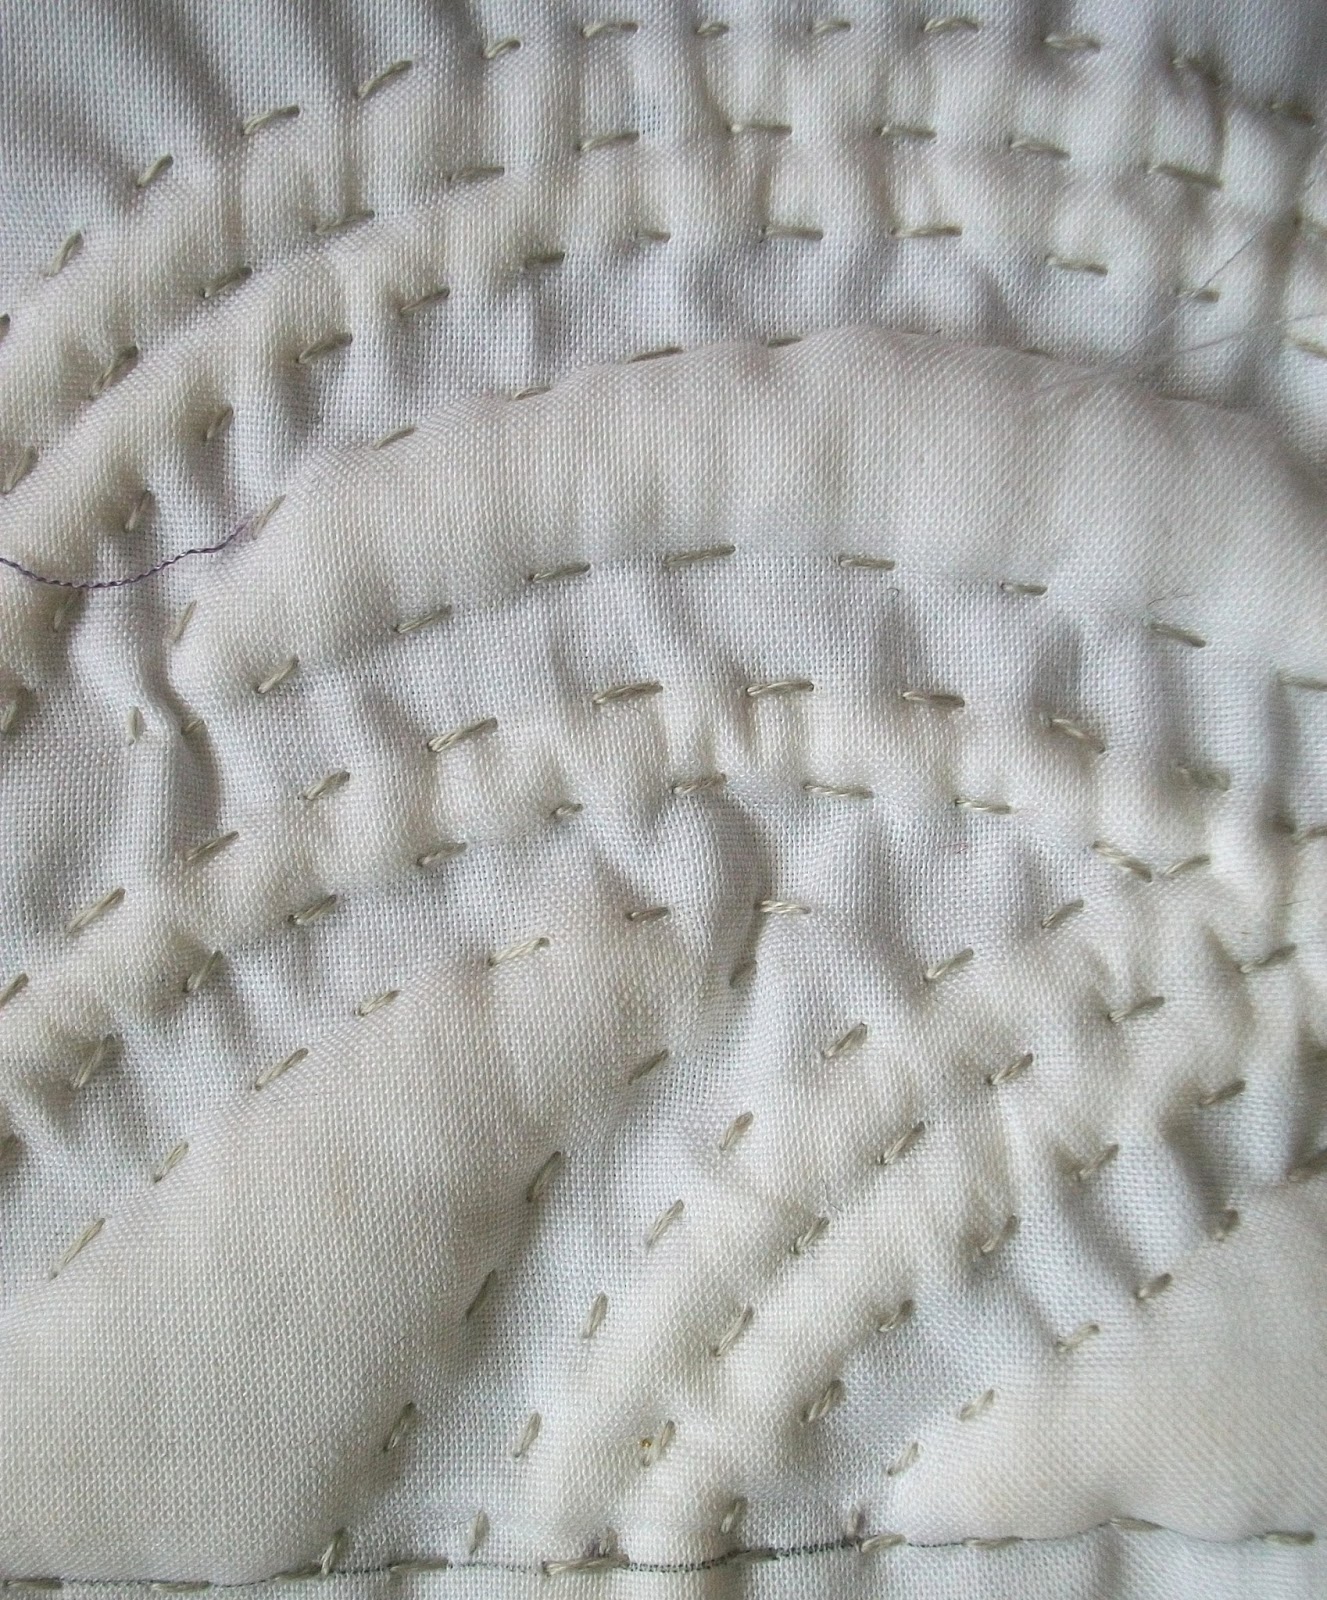 Julie B Booth: Hand Stitching Continued: Surface and Structure Part 4 ...